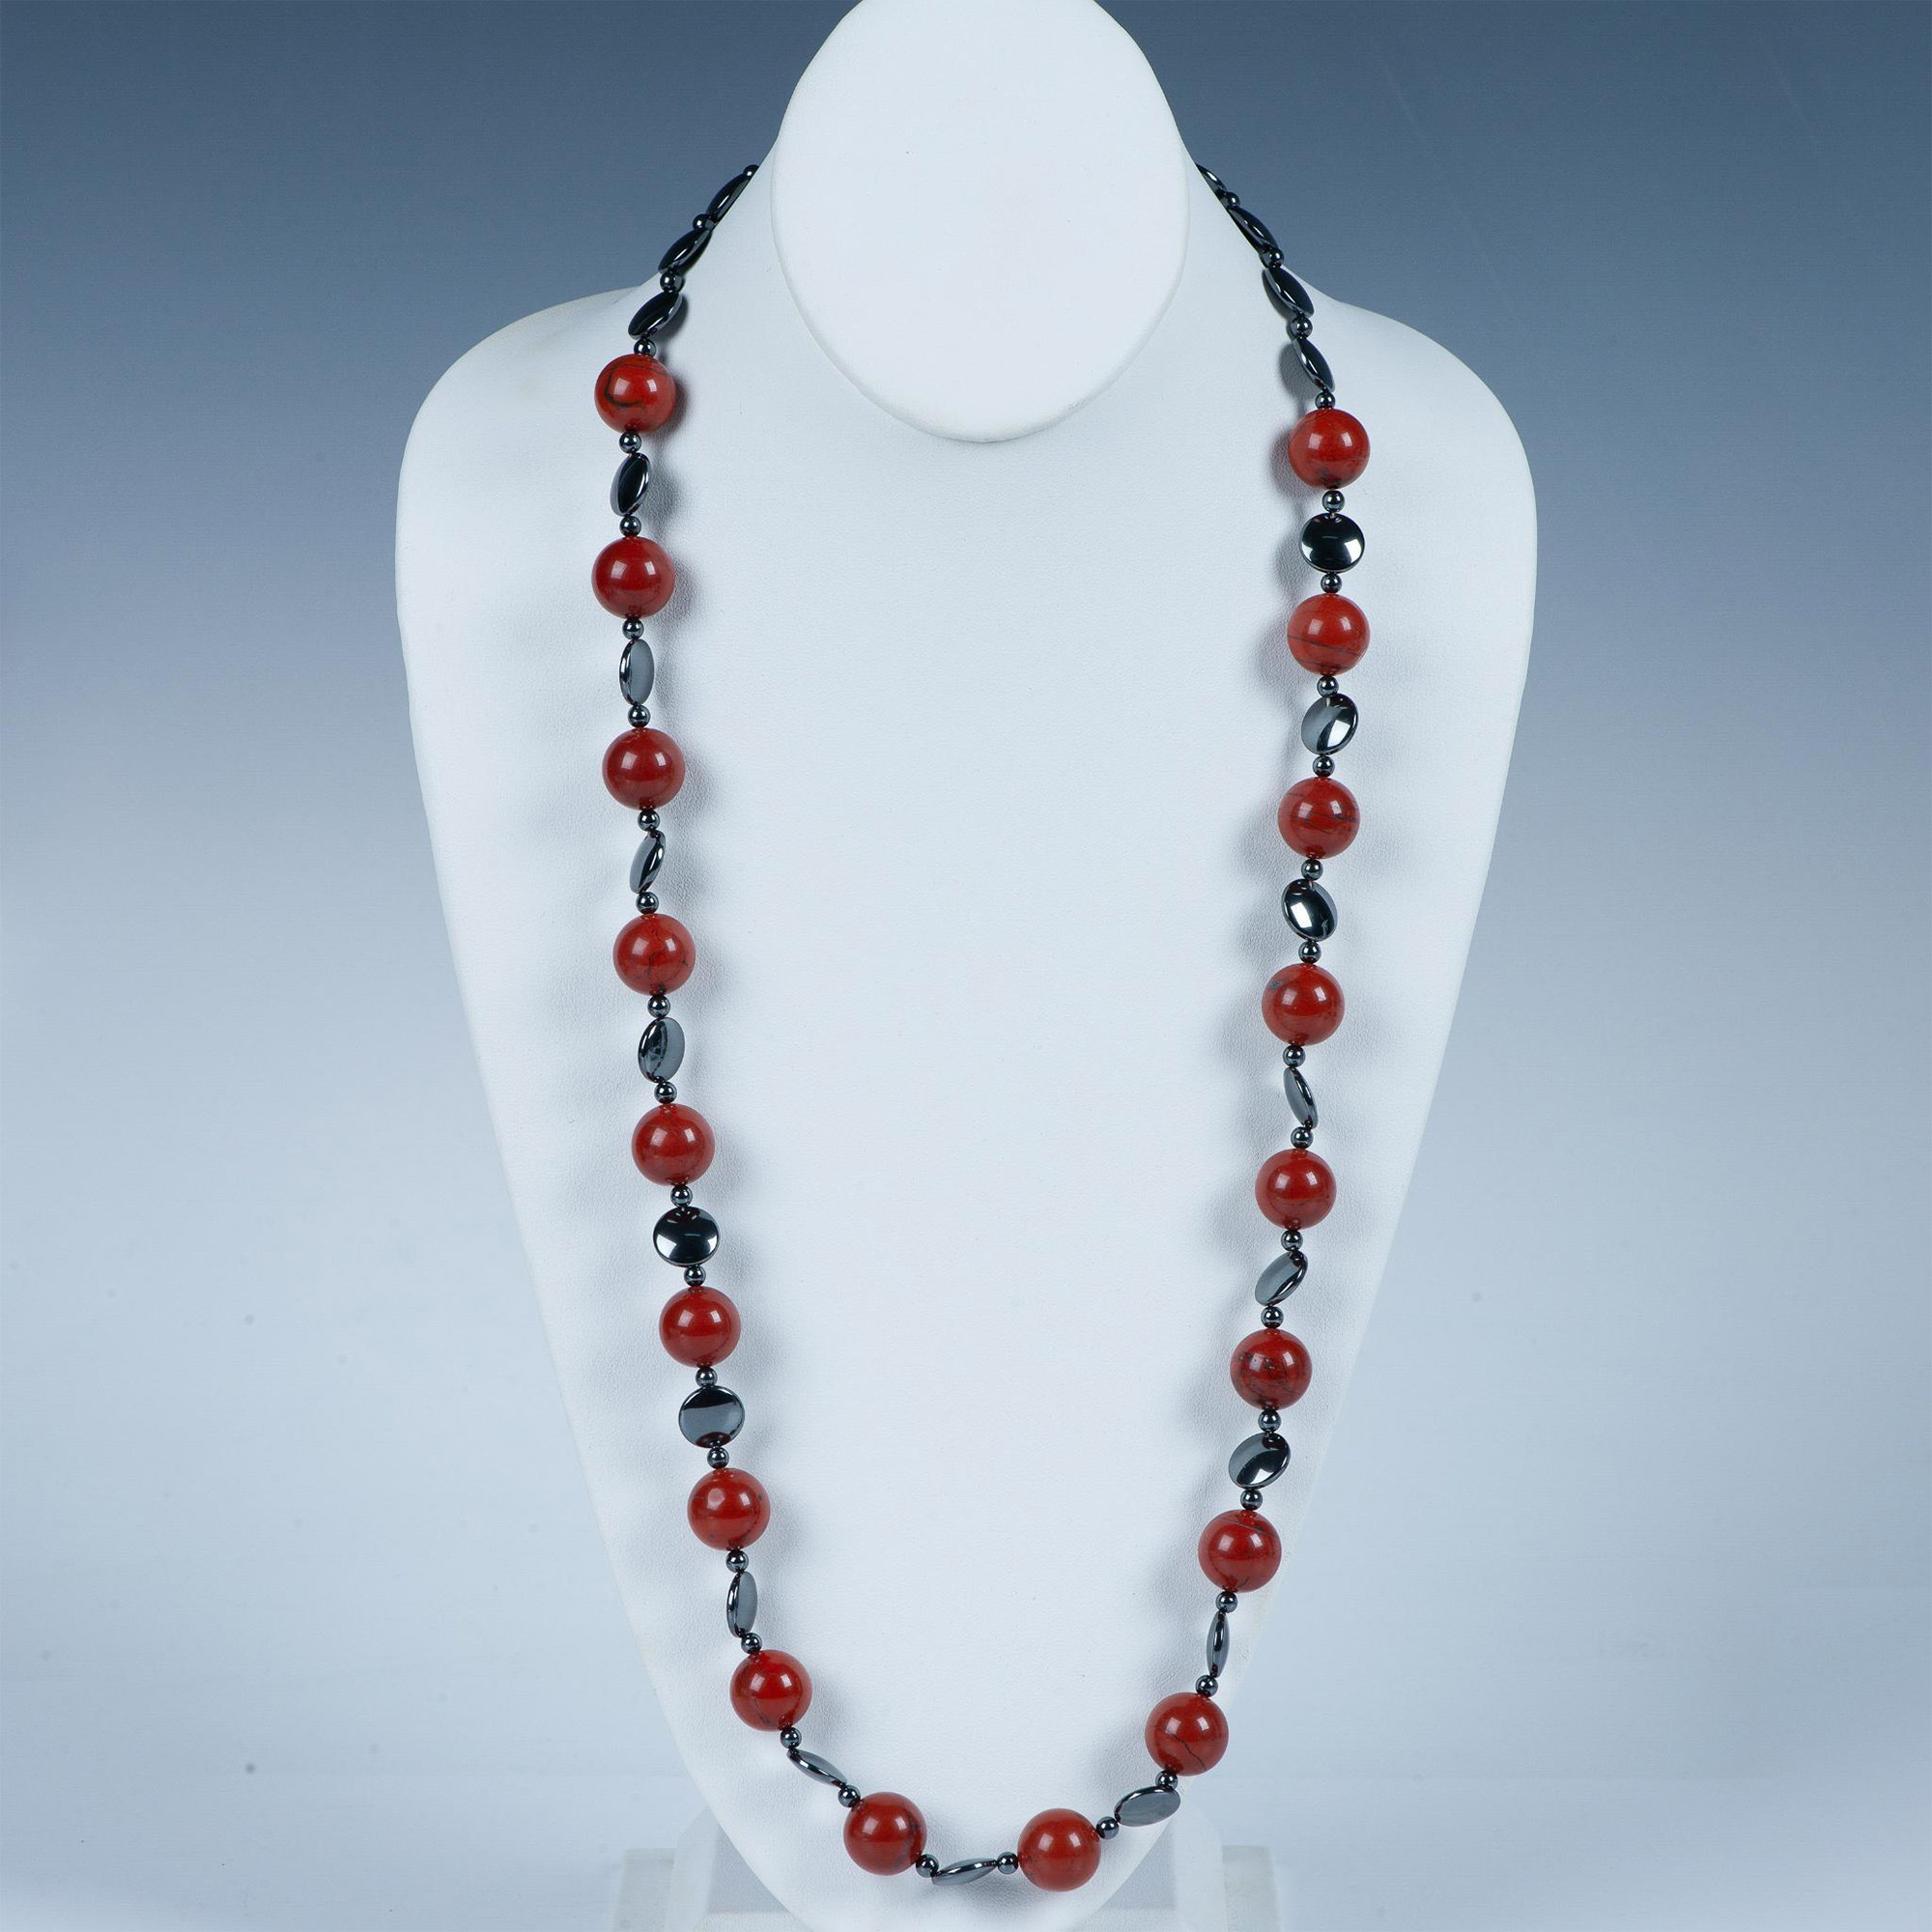 2pc Red Jasper and Hematite Beaded Necklace & Clip Earrings - Image 3 of 4